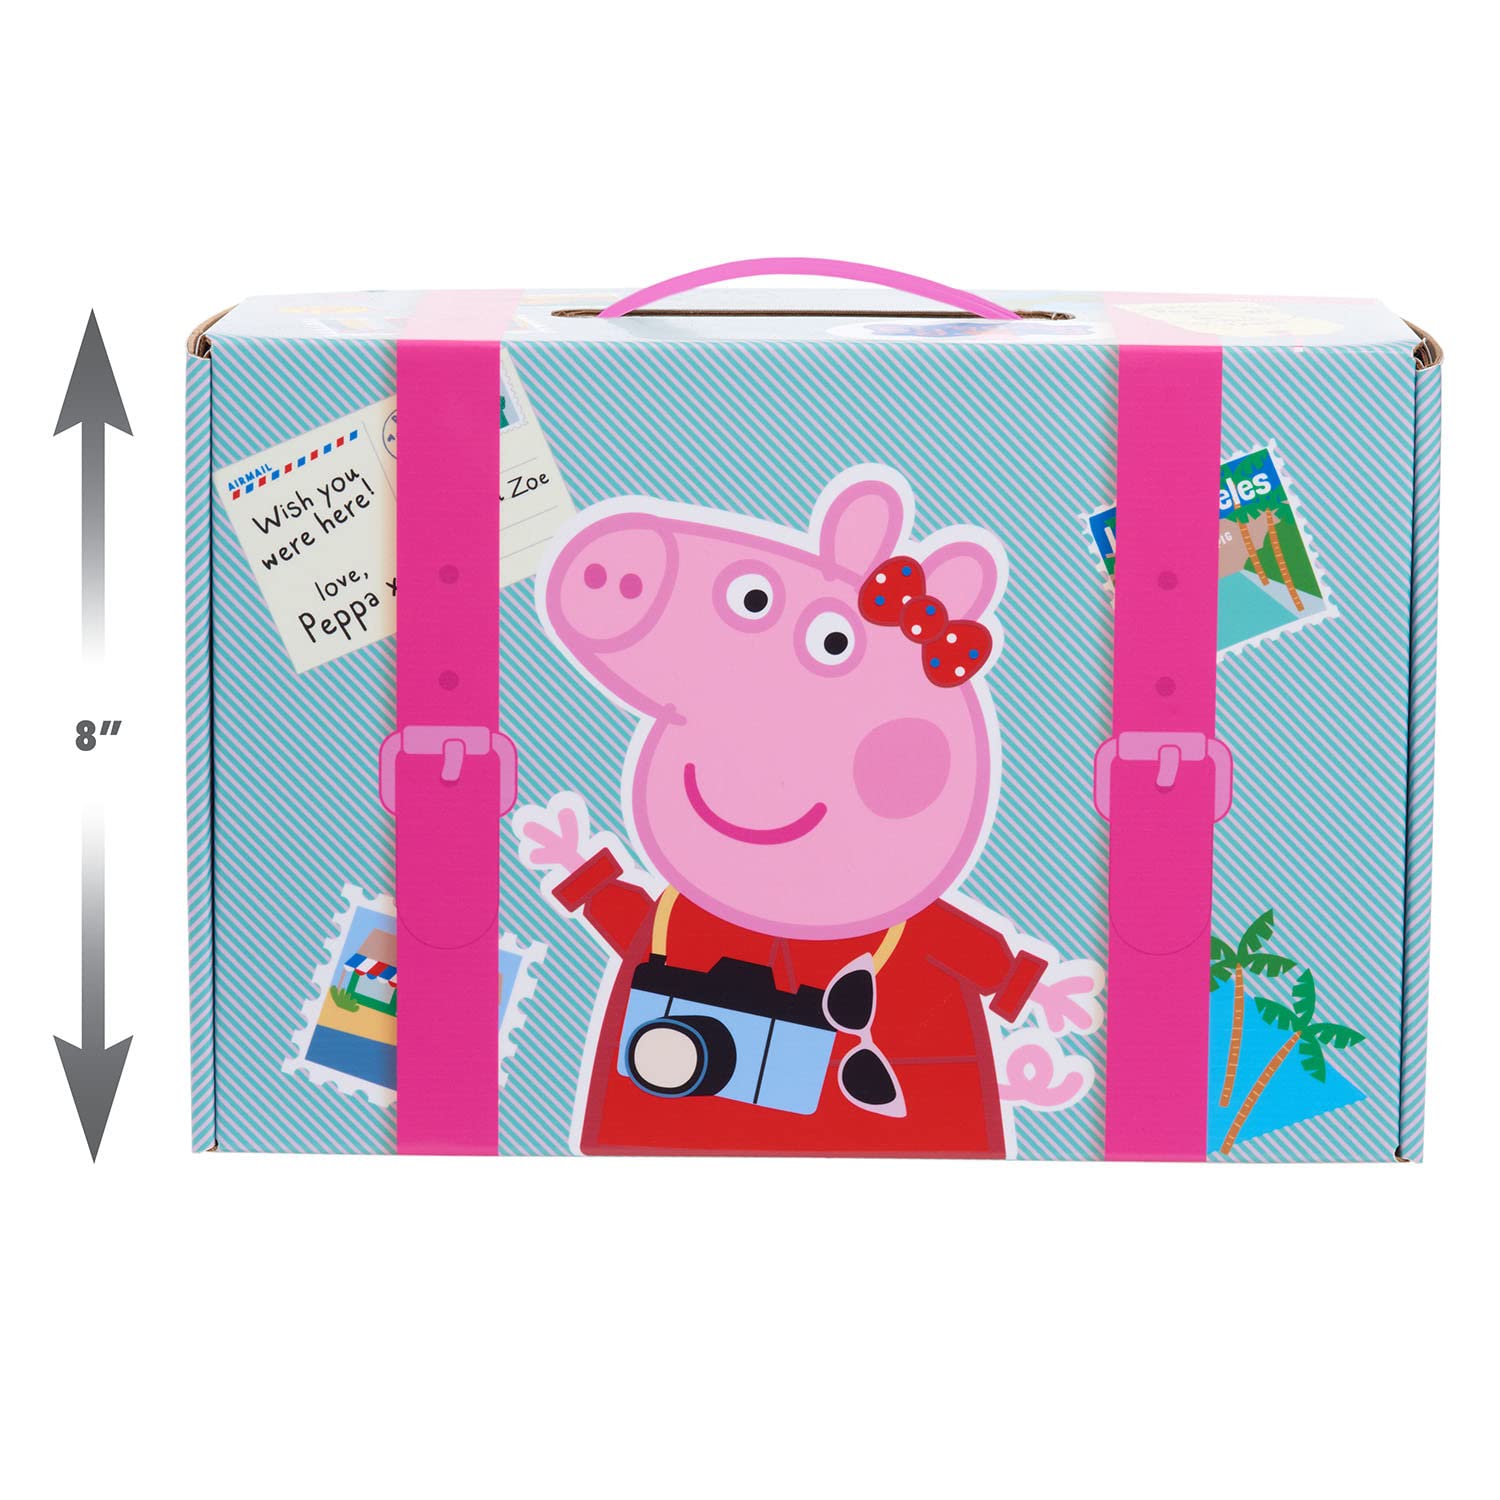 Peppa Pig Dress Up and Pretend Play Trunk, Size 4-6X, Kids Toys for Ages 3 Up, Gifts and Presents, Amazon Exclusive